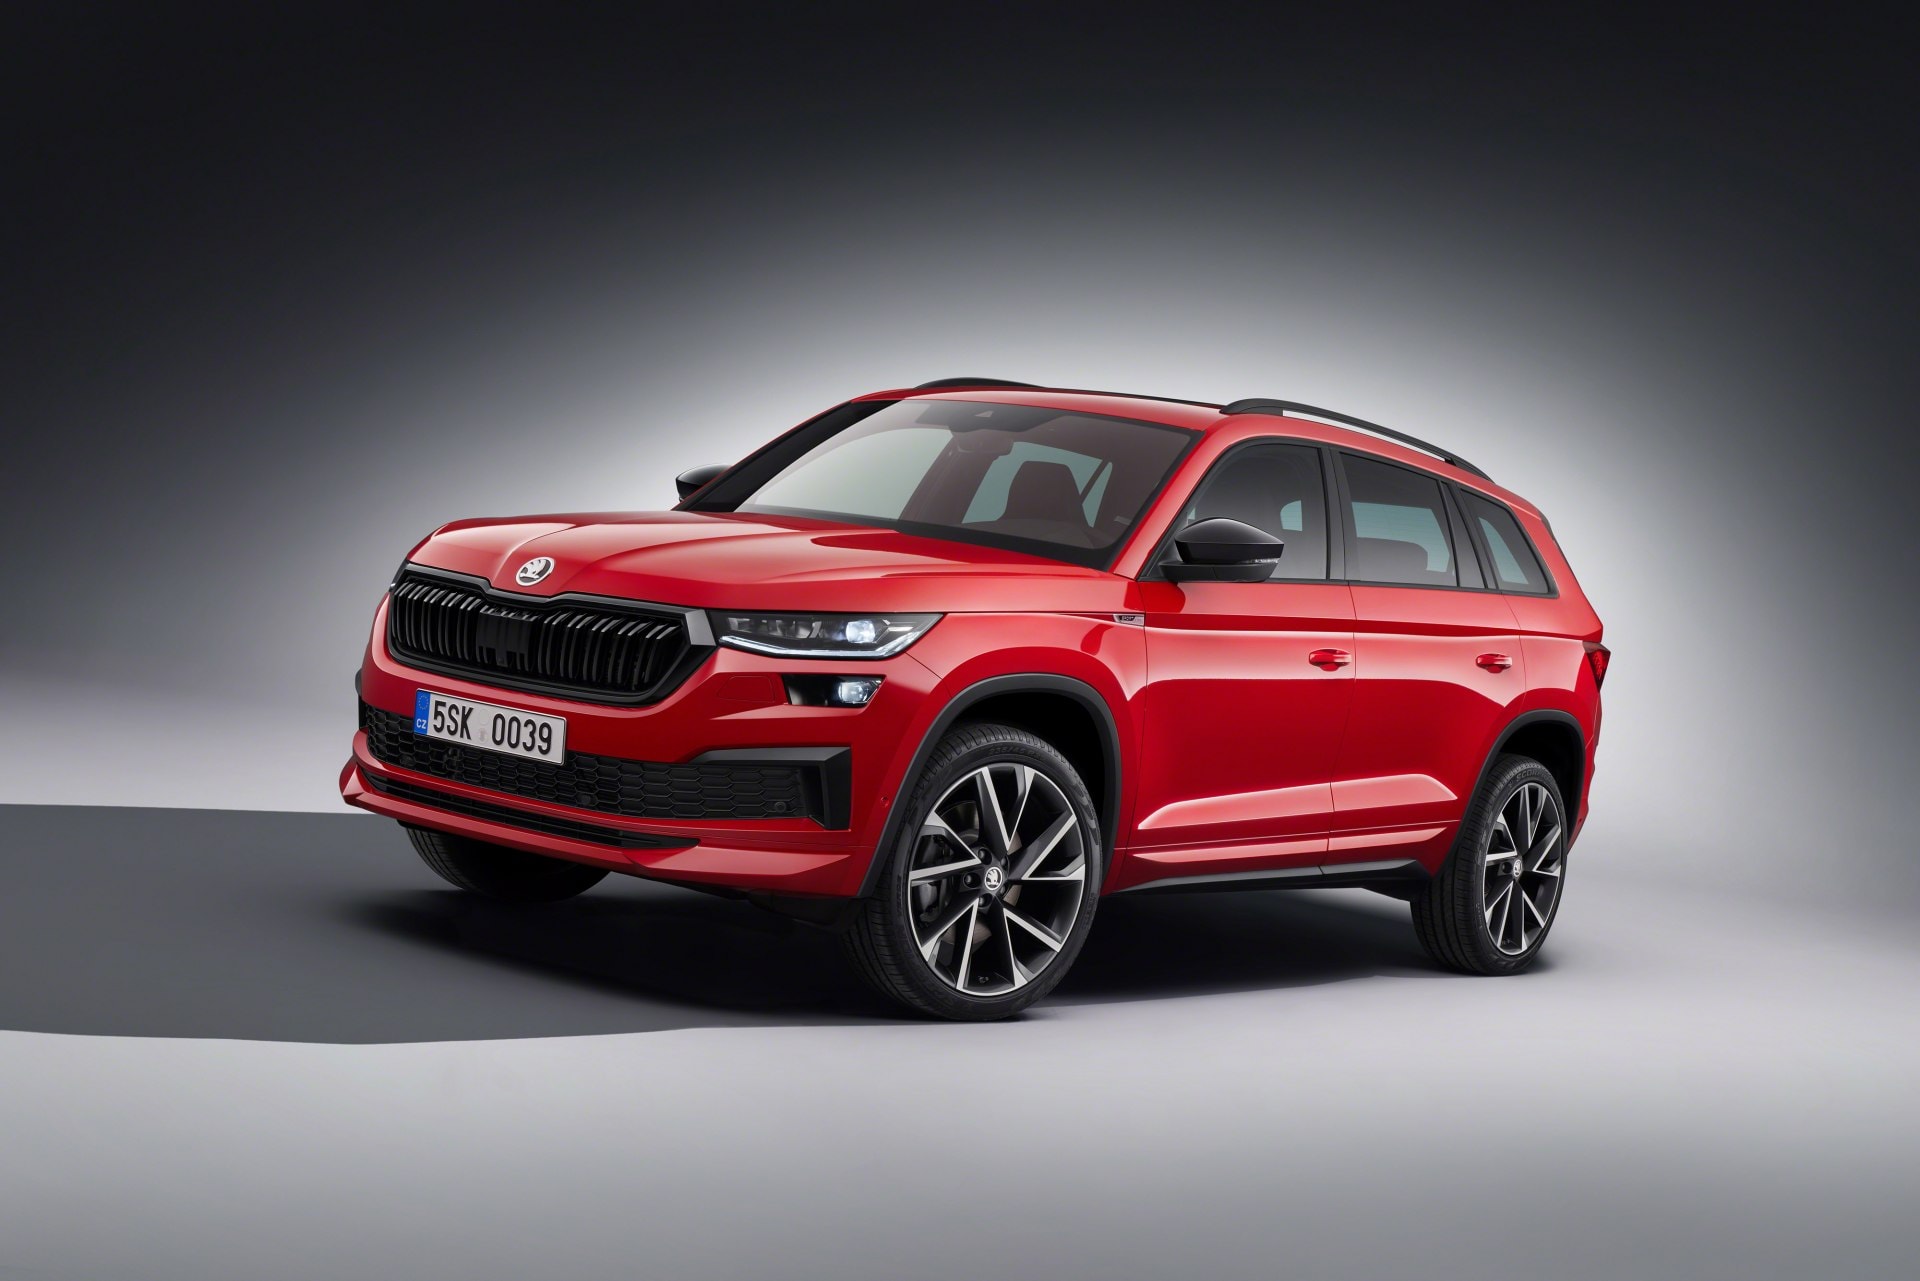 2021 Skoda Kodiaq Facelift Debuts With Dynamic Looks, Gasoline RS